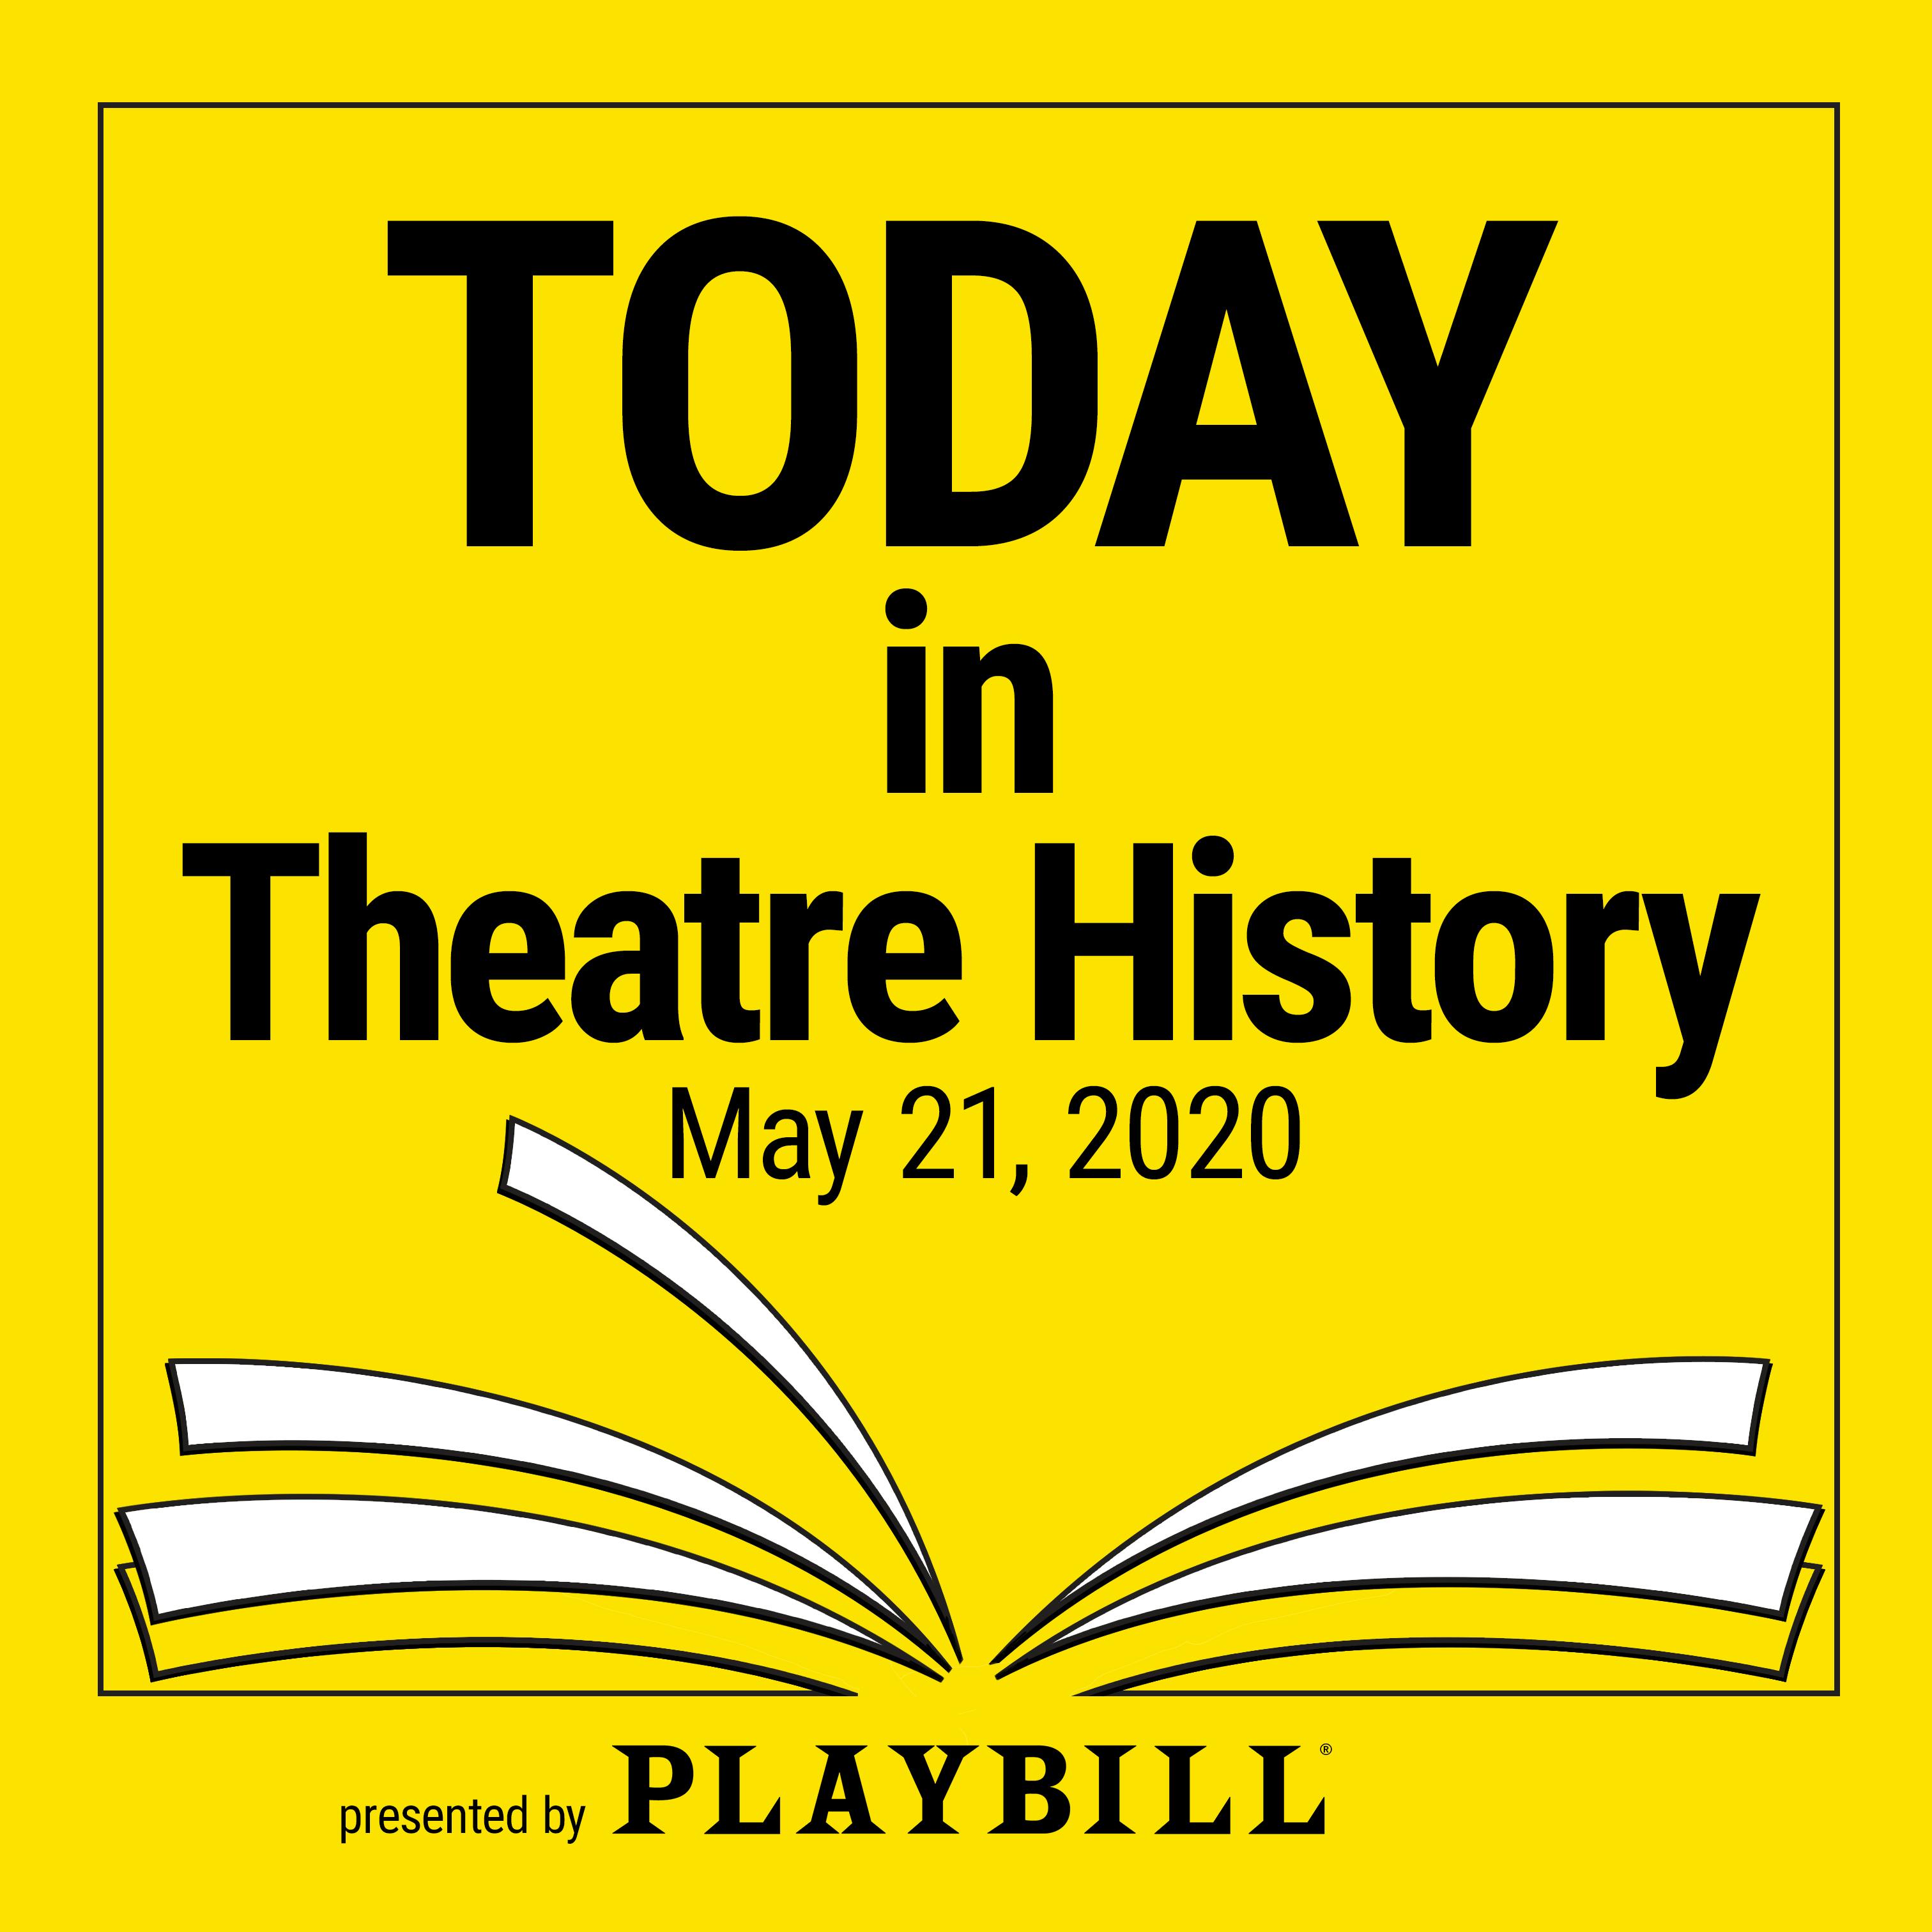 May 21, 2020: Light the lights, because Gypsy made its Broadway debut in 1959!